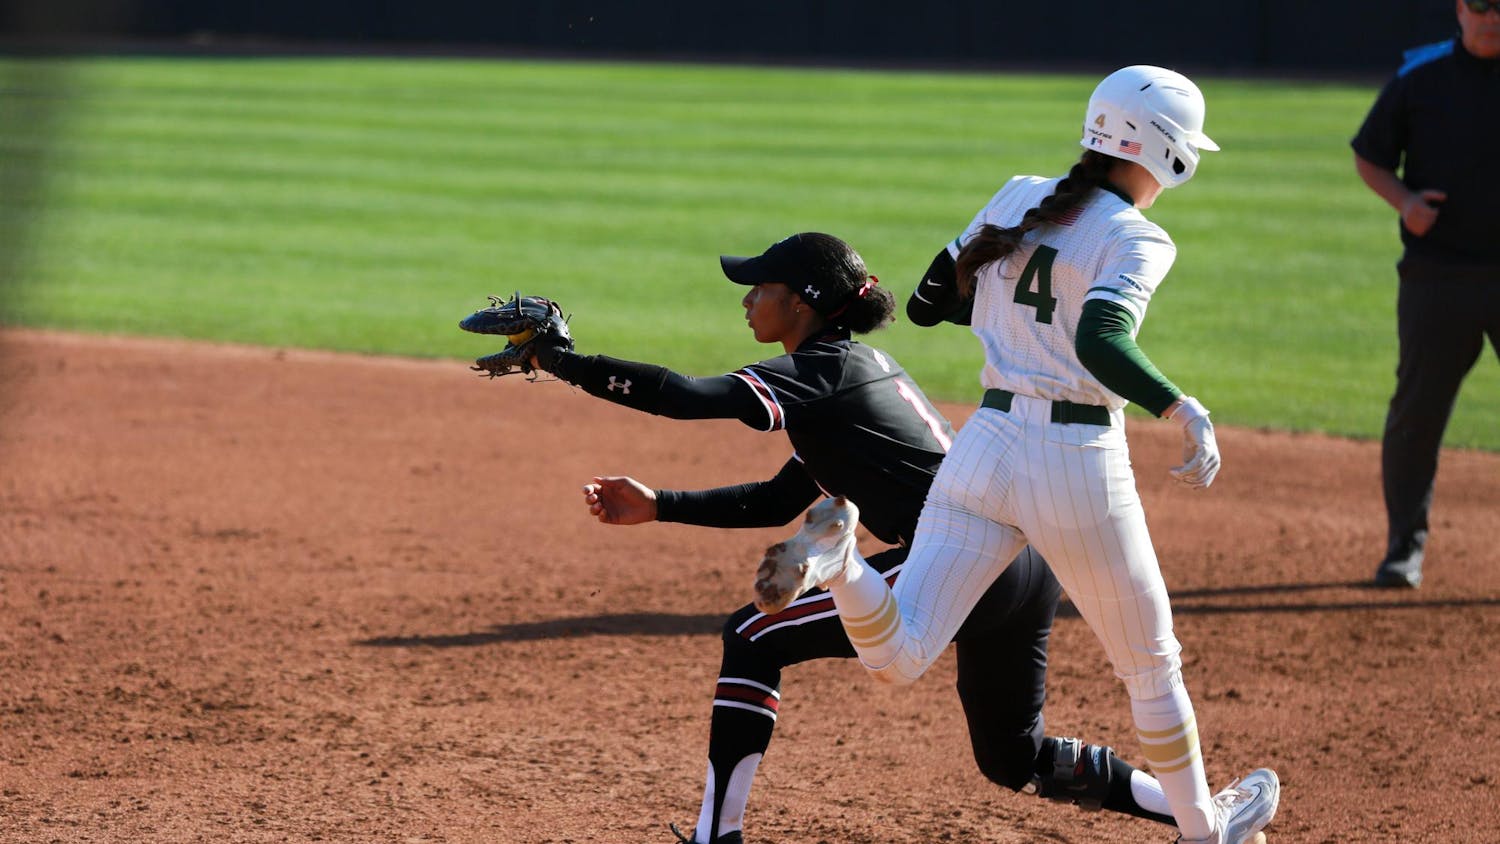 Senior outfielder Aniyah Black catches a ball for an out during South Carolina's matchup against UNC Charlotte on Feb. 25, 2024. Black had 10 putouts and scored one run in the Gamecocks’ 7-2 victory.